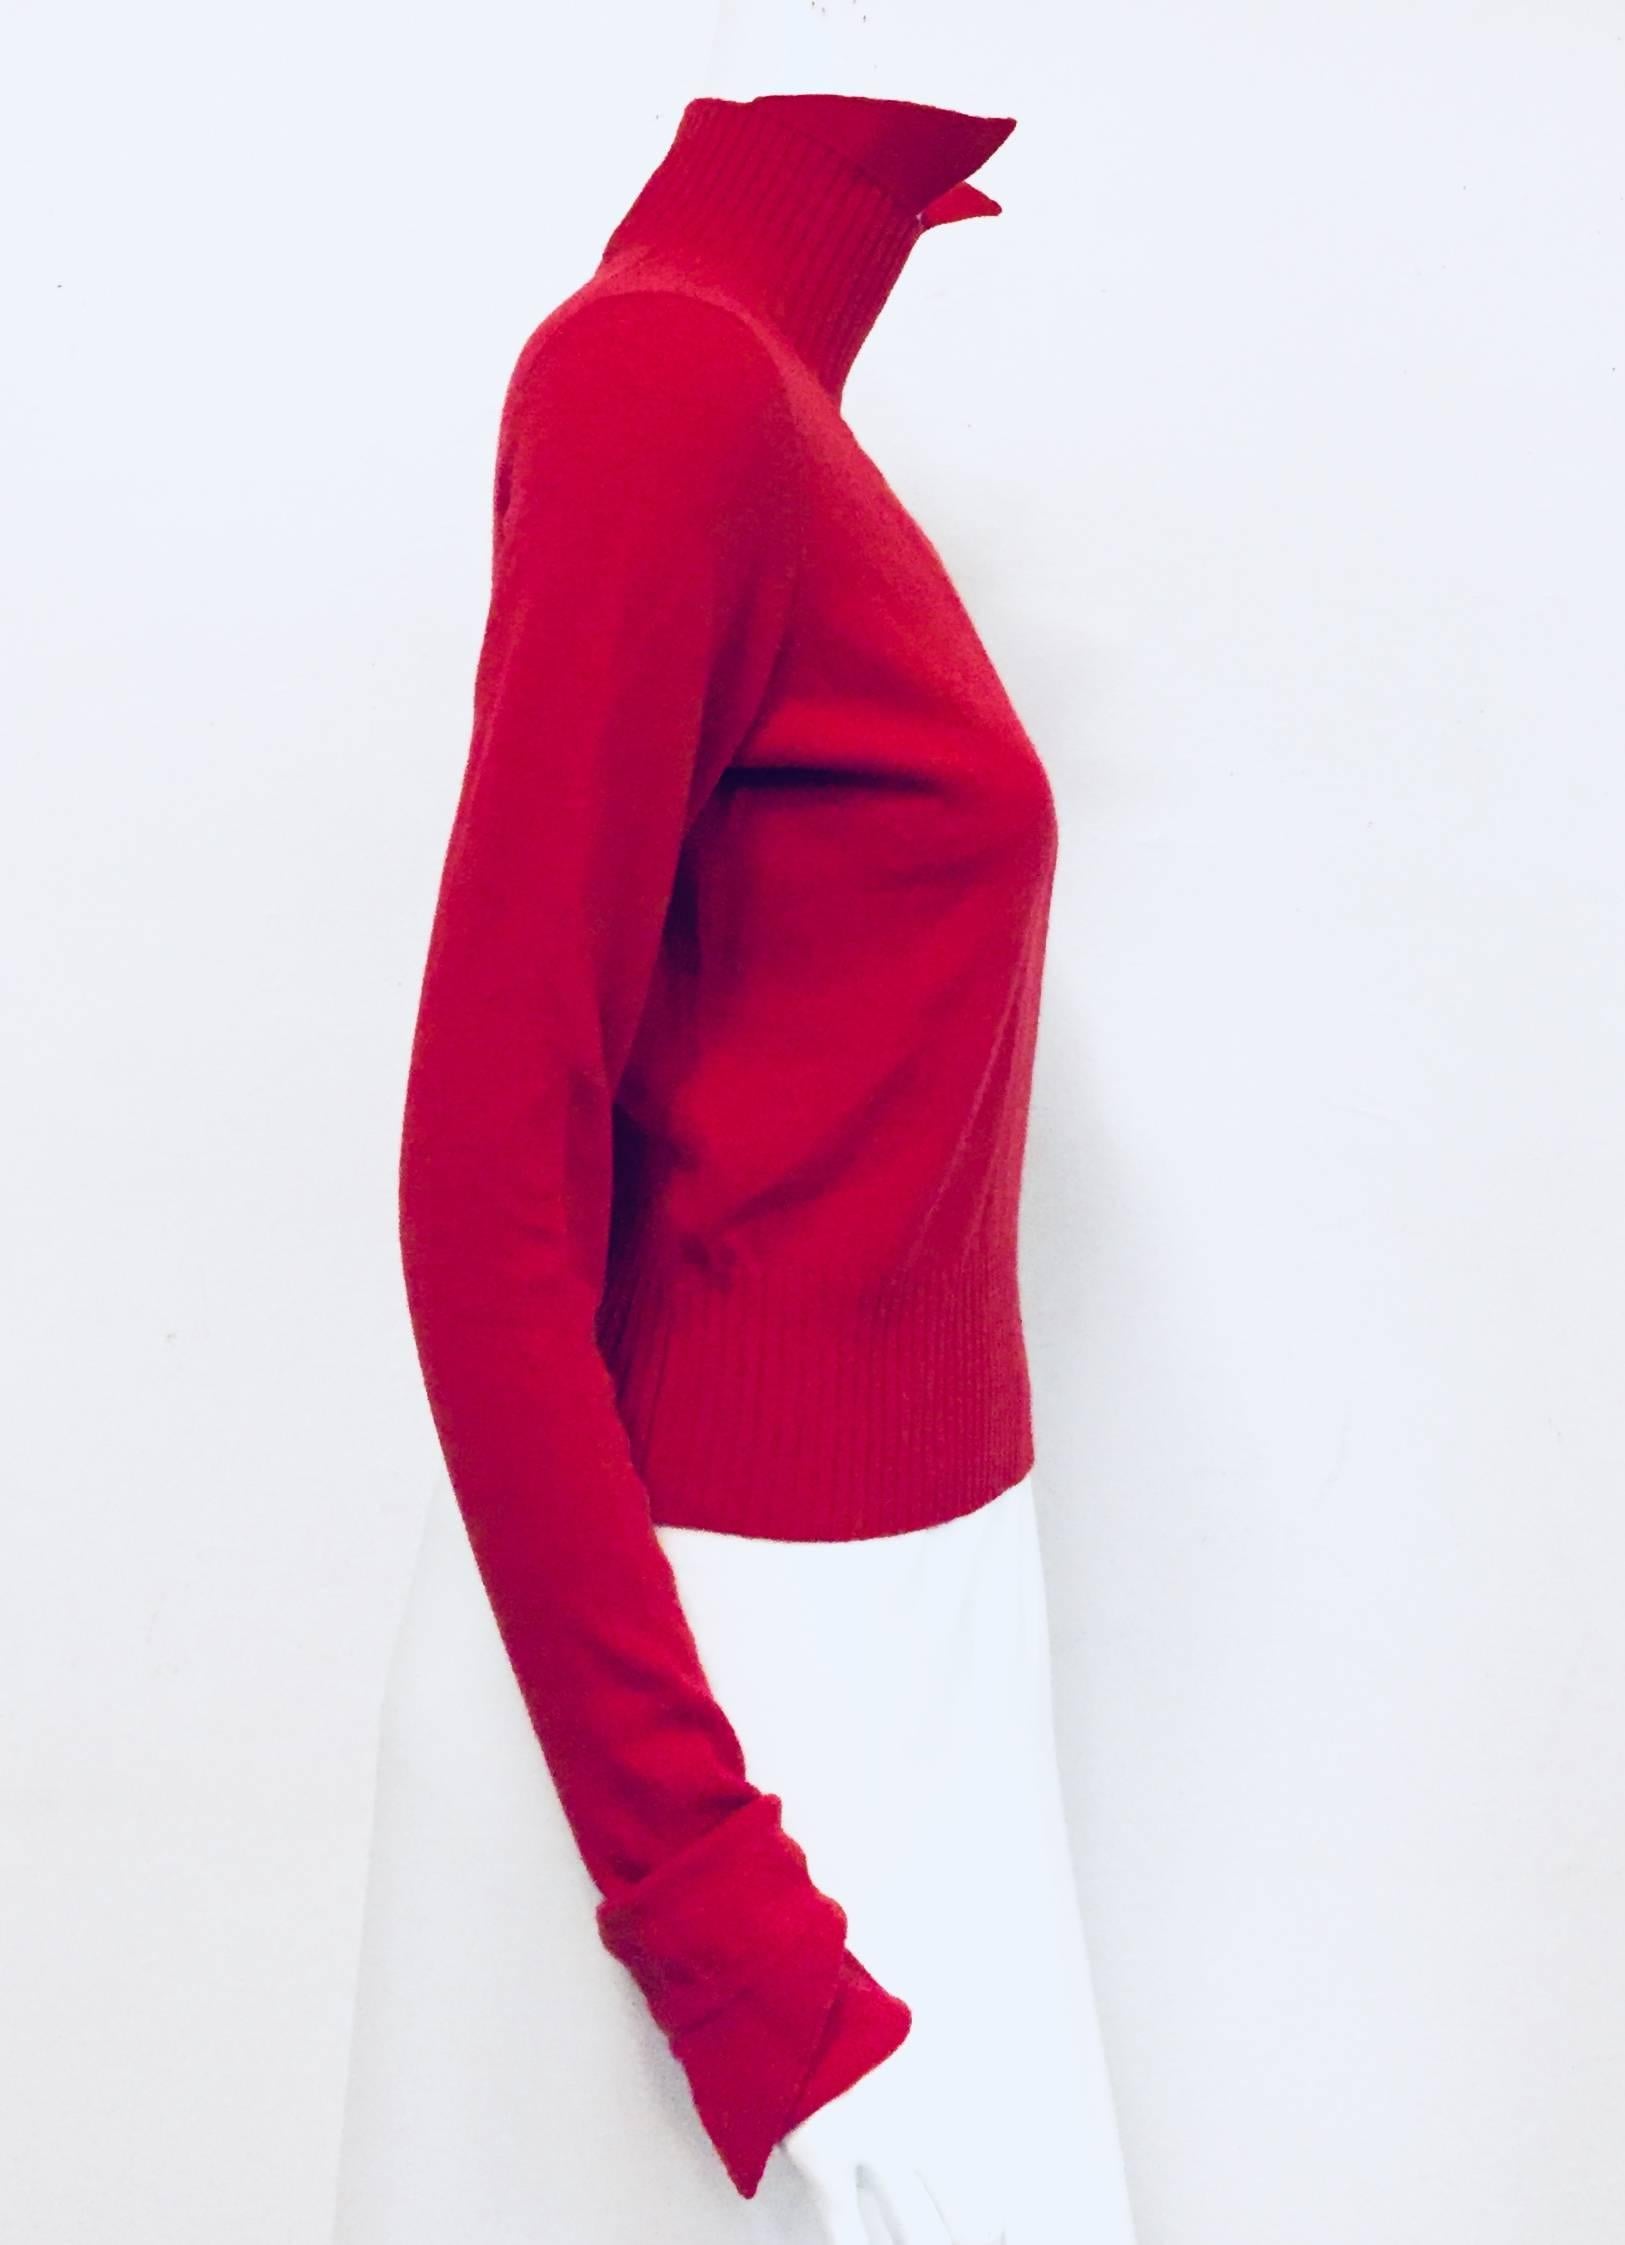 Chanel red cashmere sweater feels amazing and luxurious when worn. It is the kind of piece that will never go out of style. Made of the finest cashmere in the world.  The pointed up collar adds a French flair to this look. This pullover is unlined